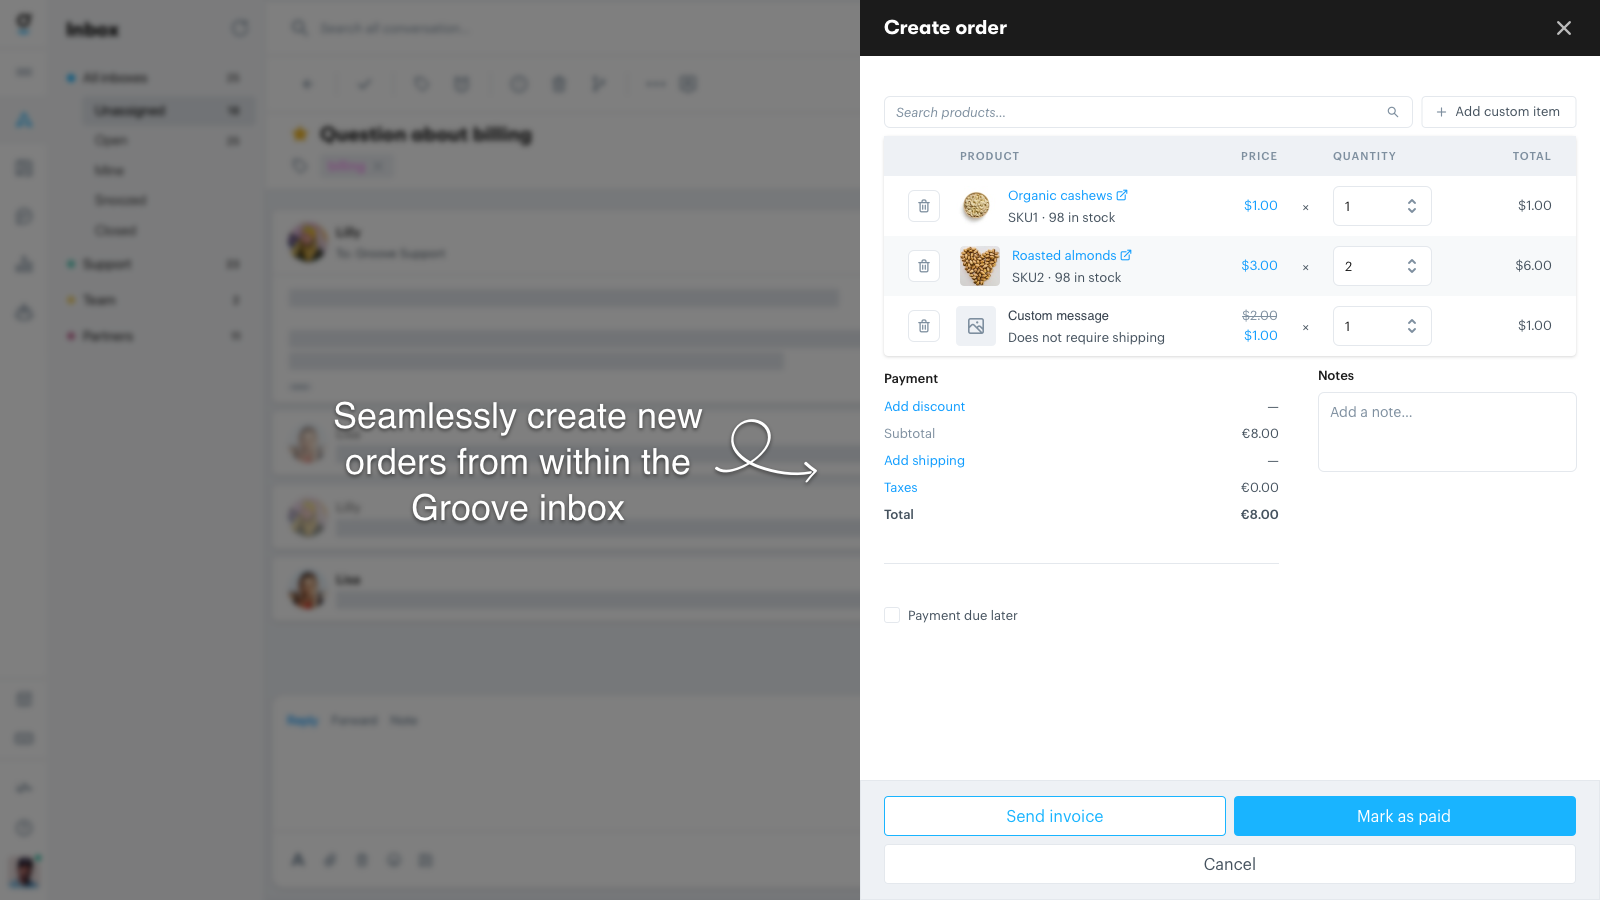 Seamlessly create new orders from within the Groove Inbox.